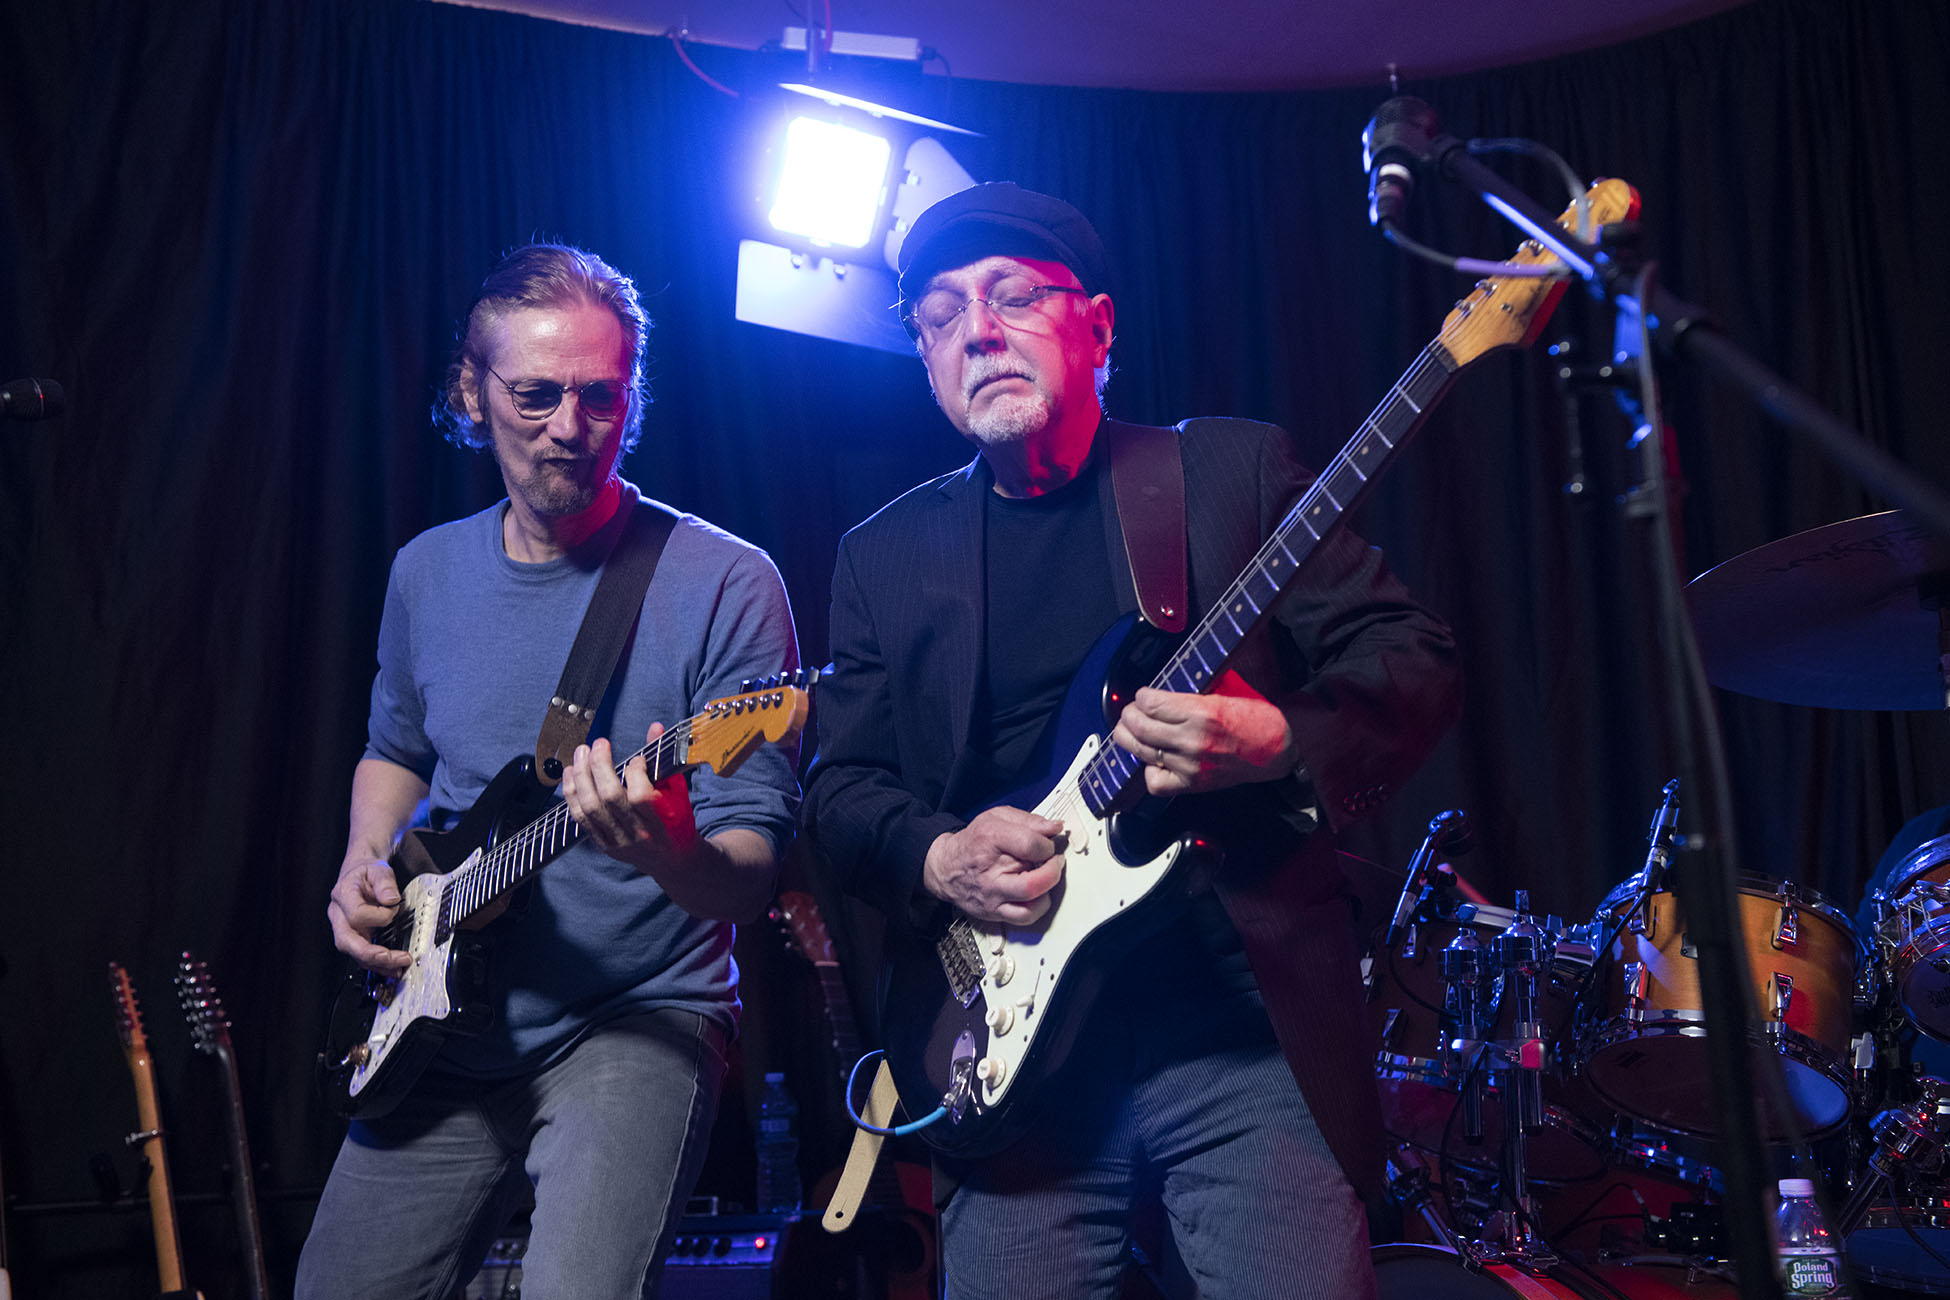 Mike Pachelli and Phil Keaggy at the LoFaro Center of The Performing Arts, March 3, 2019